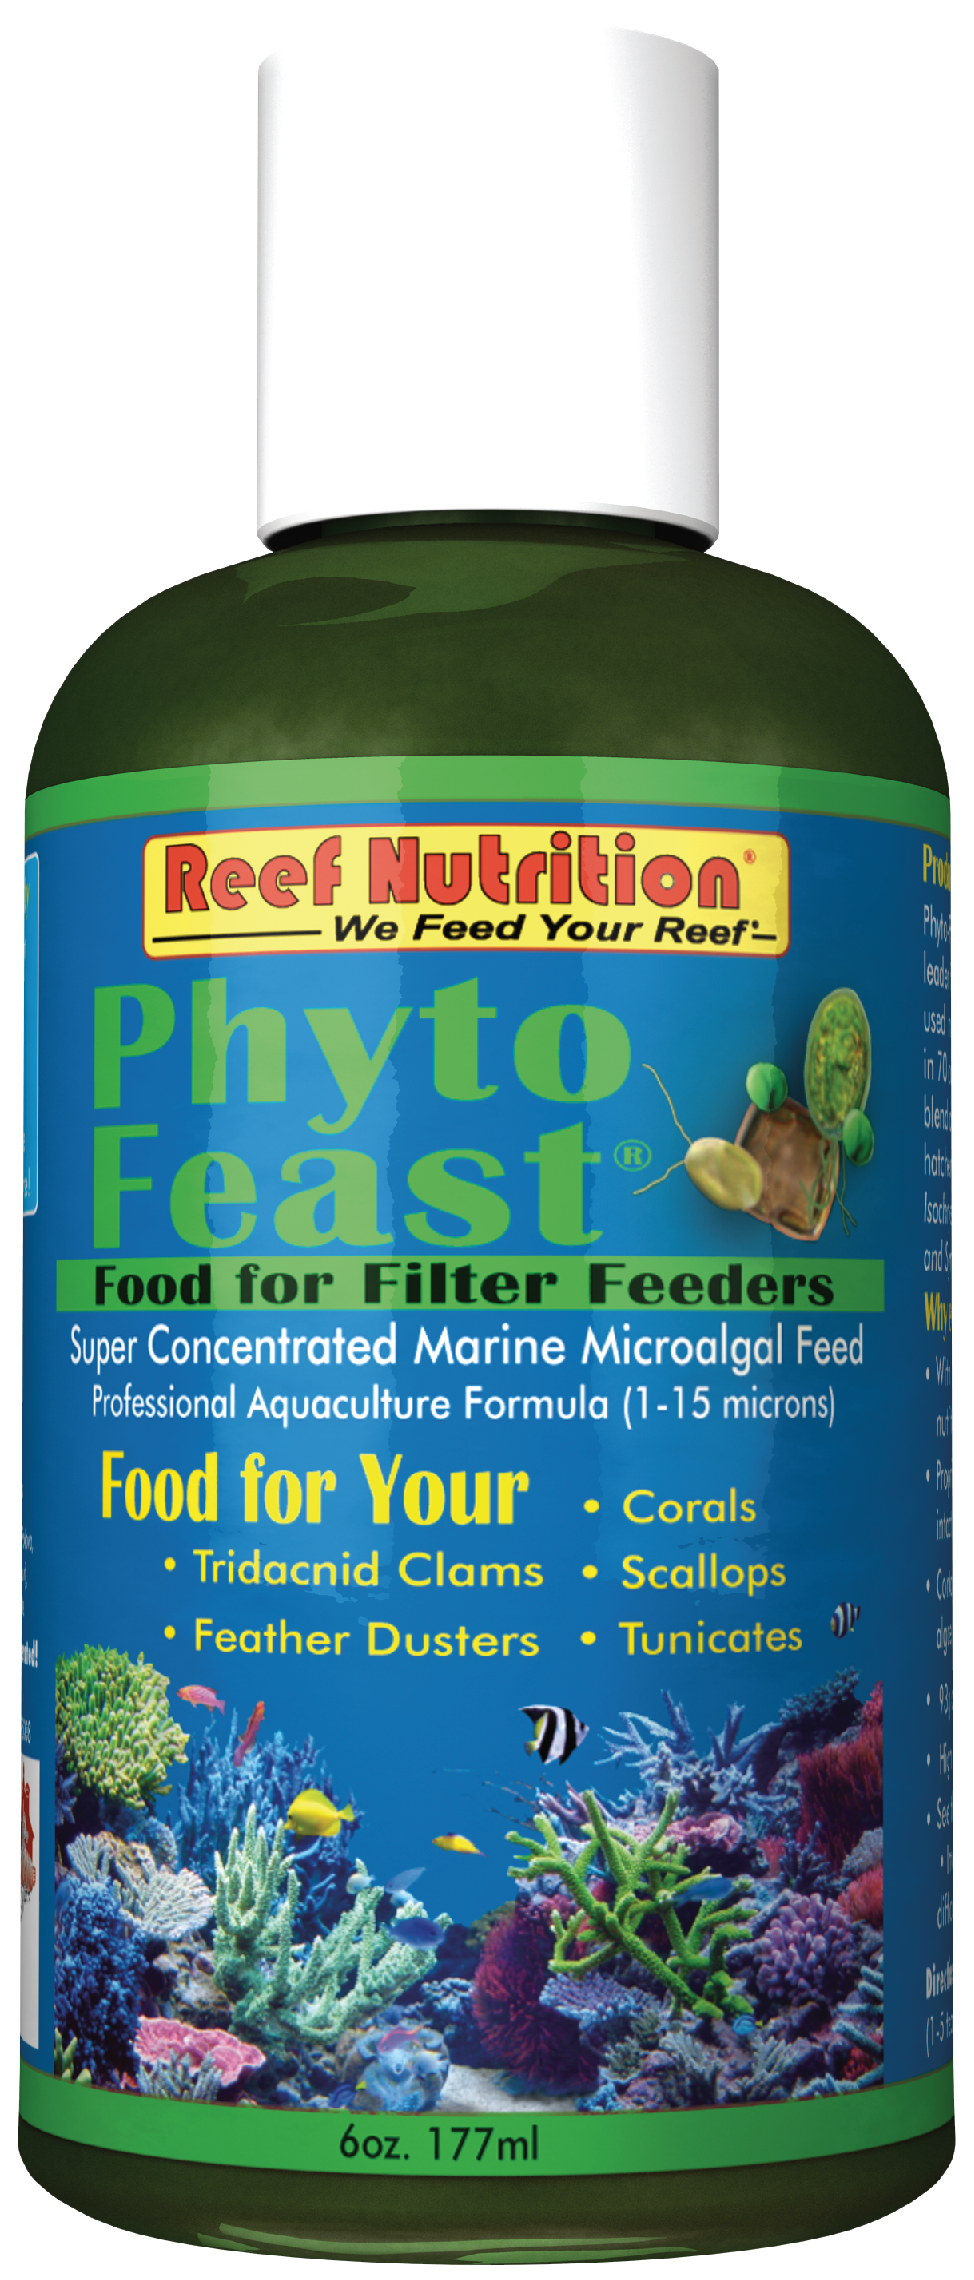 Phyto Feast Concentrate